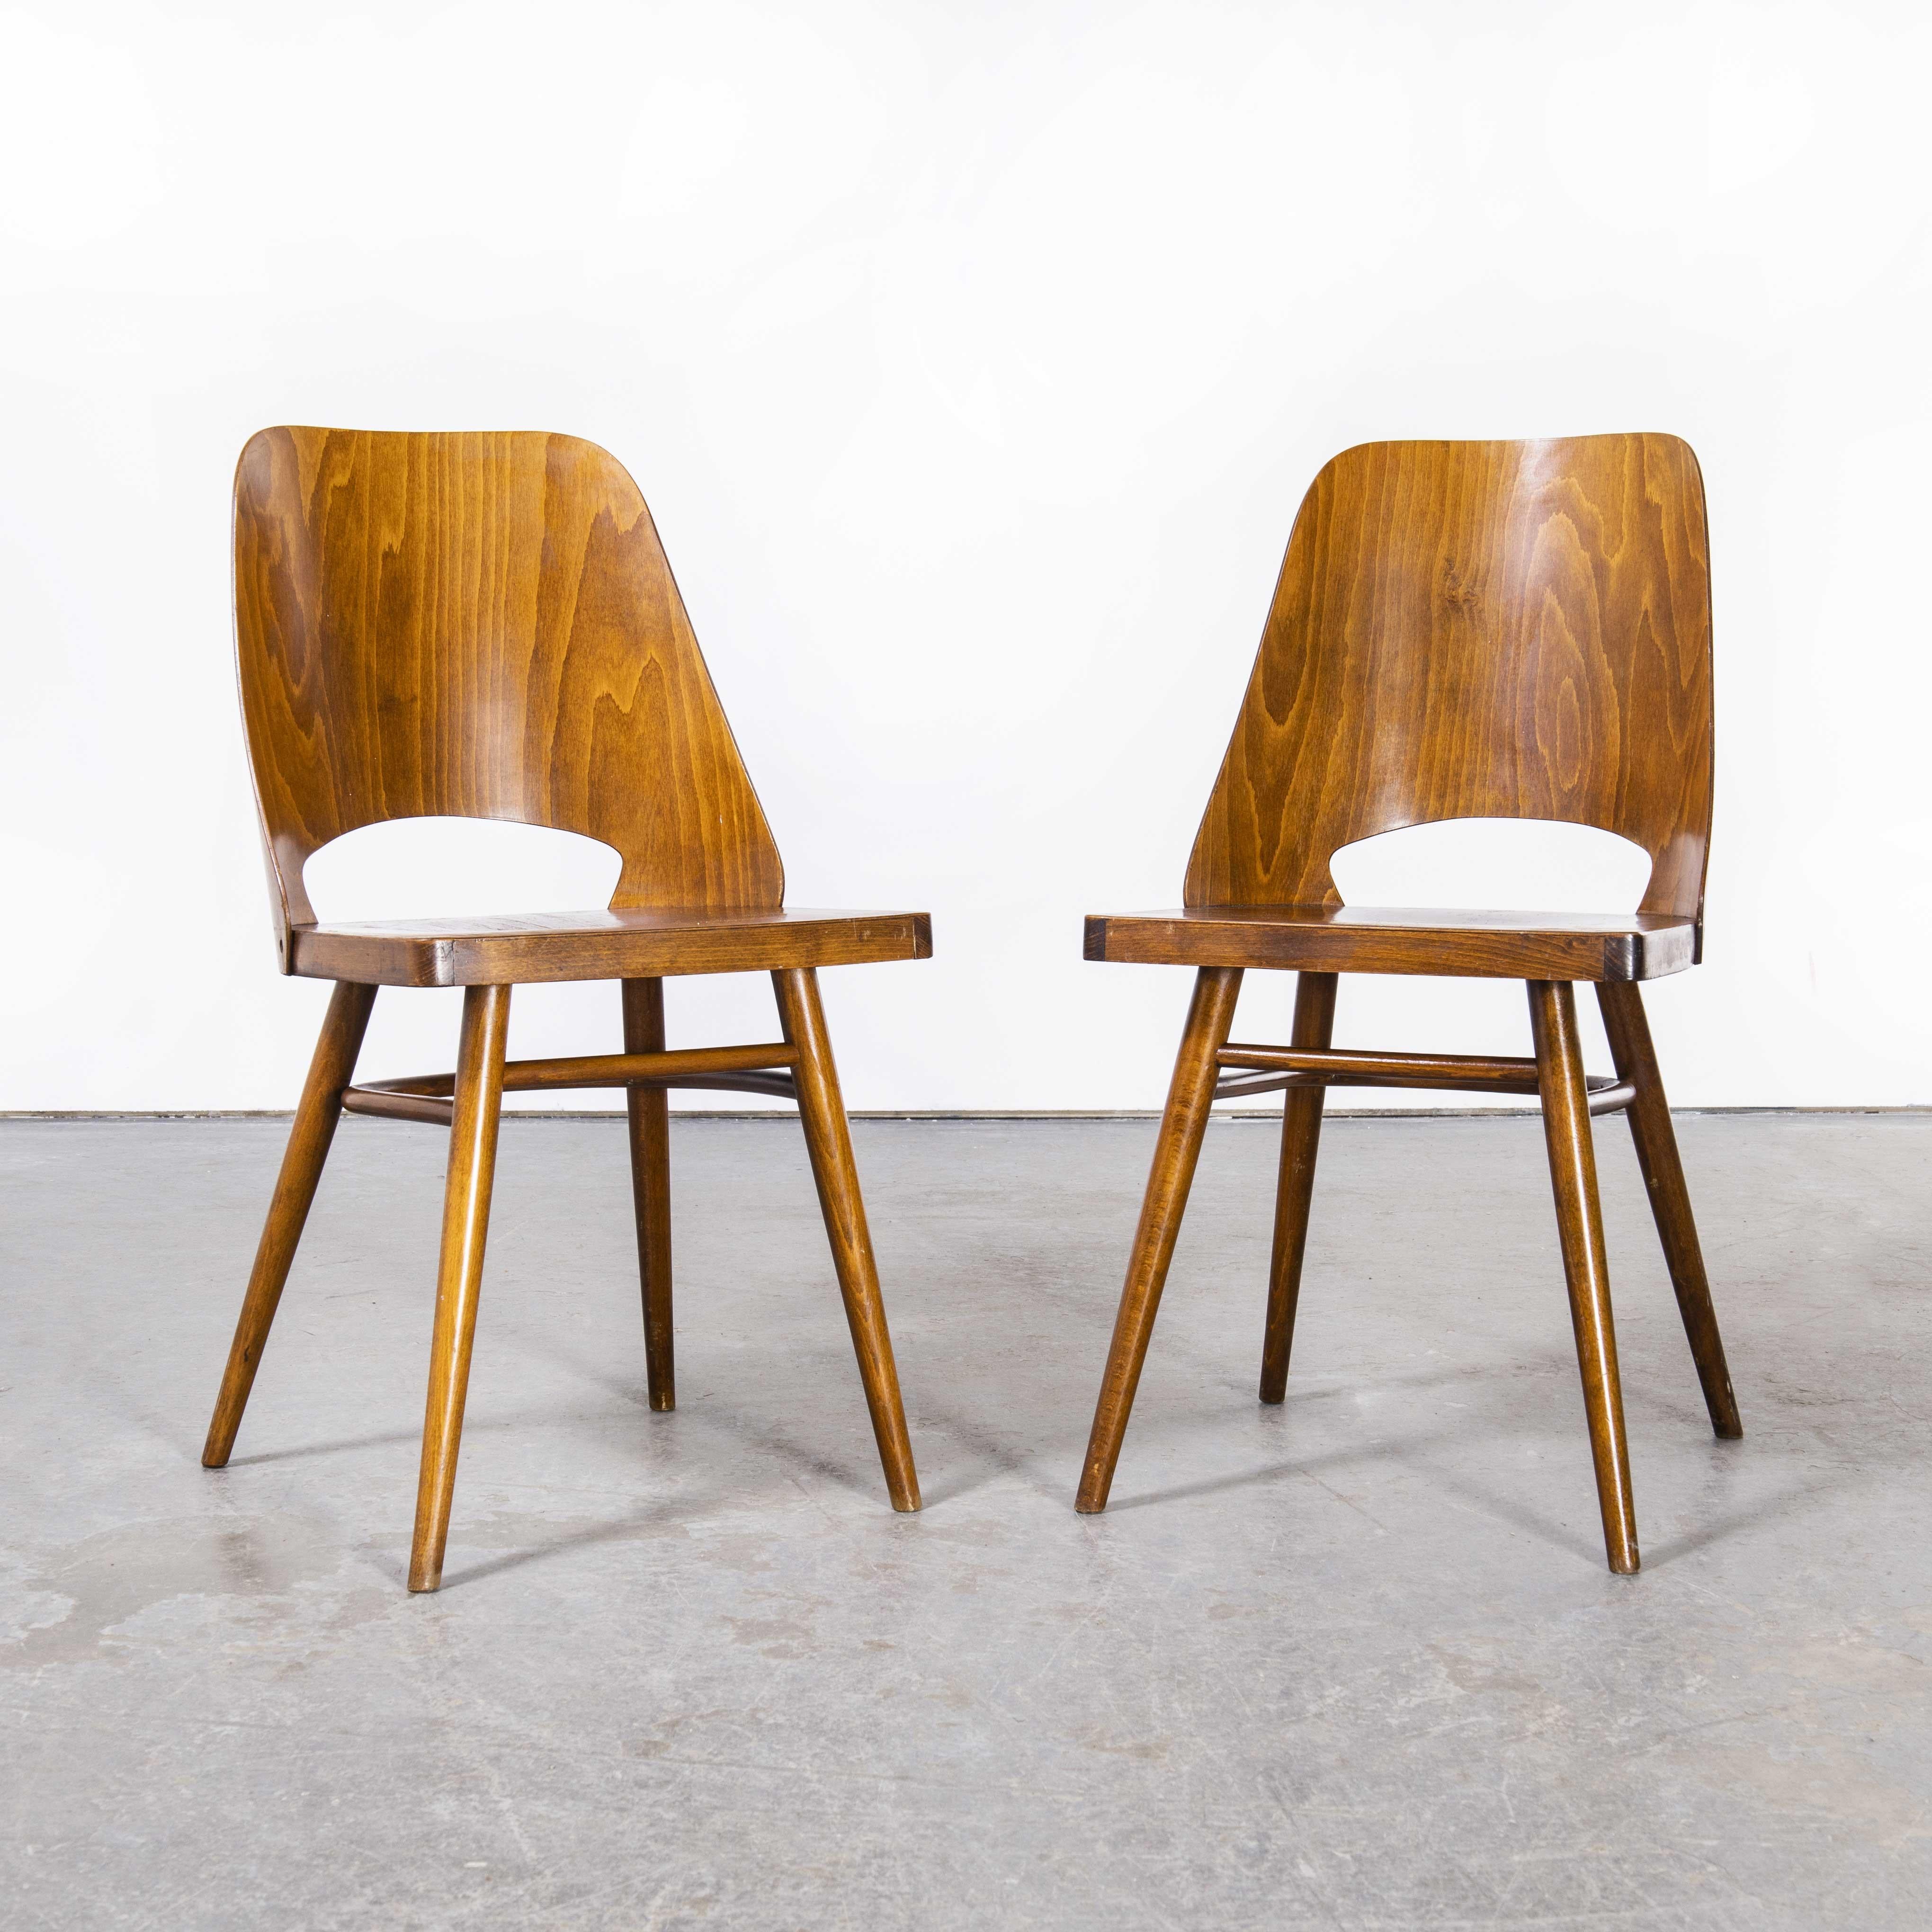 1950’s Honey beech dining chairs by Radomir Hoffman – pair.
1950’s Honey beech dining chairs by Radomir Hoffman – pair. These chairs were produced by the famous Czech firm Ton, still trading today and producing beautiful chairs, they are an